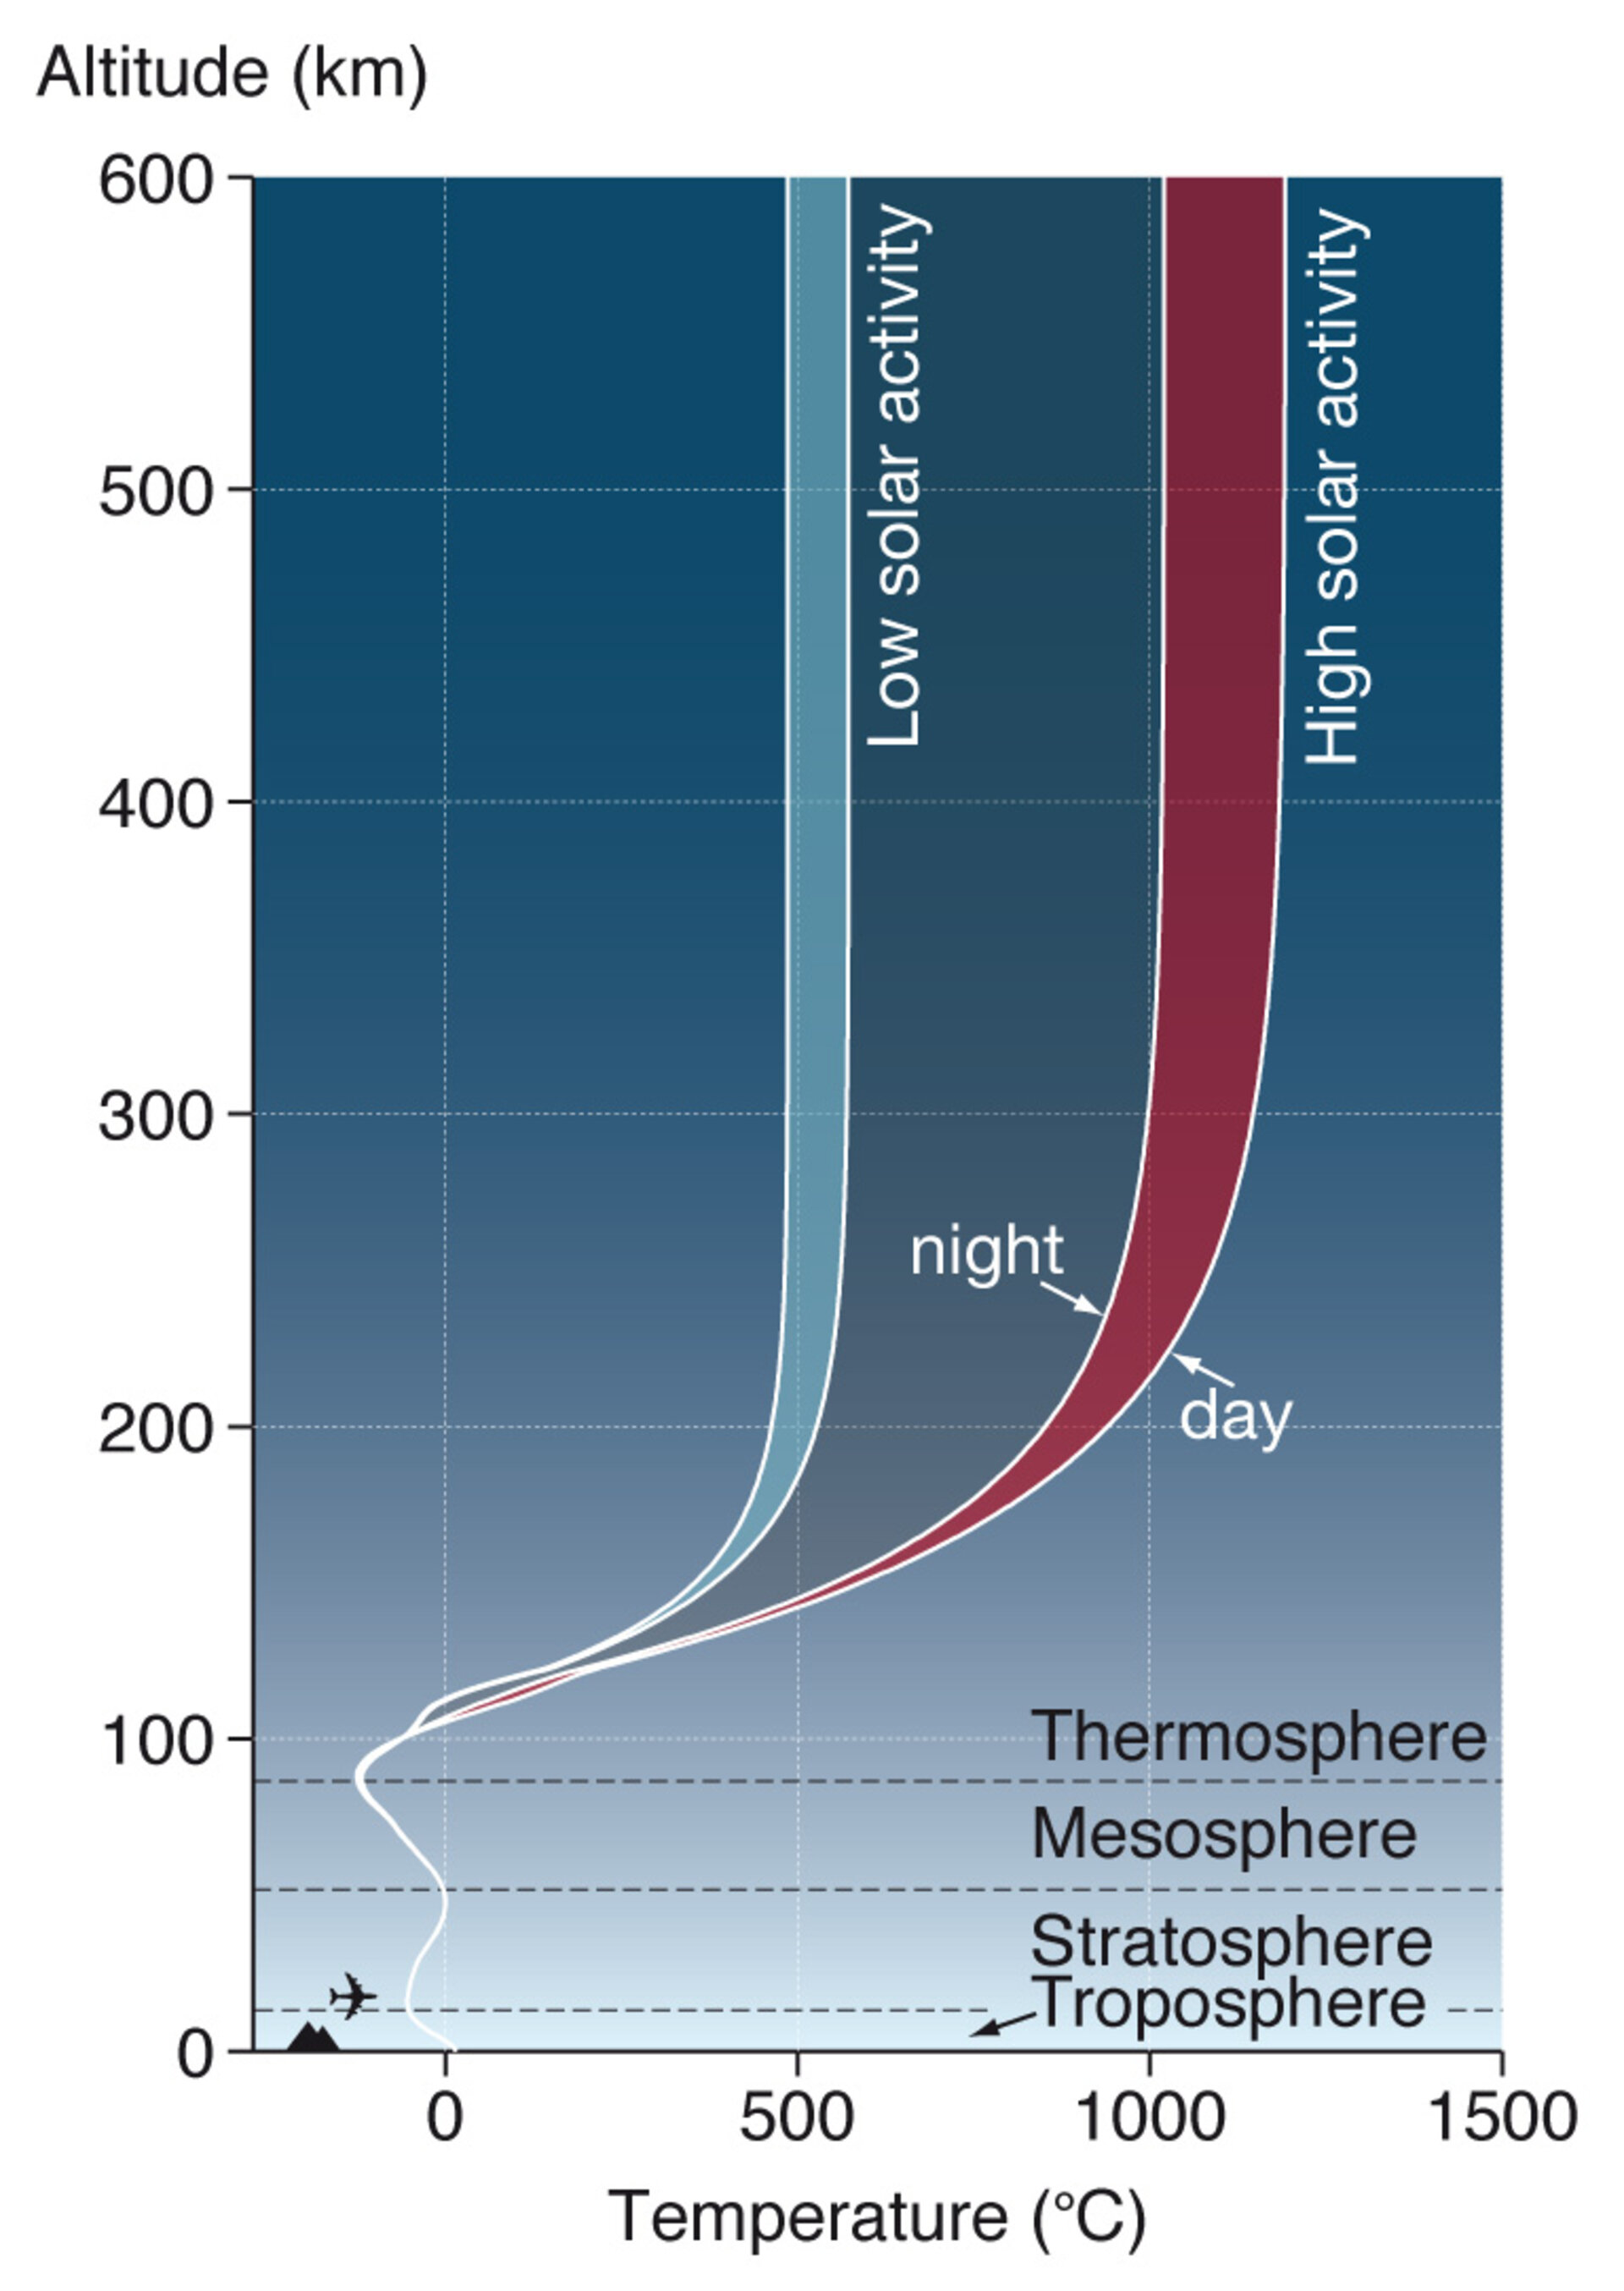 Atmospheric temperature changes with altitude